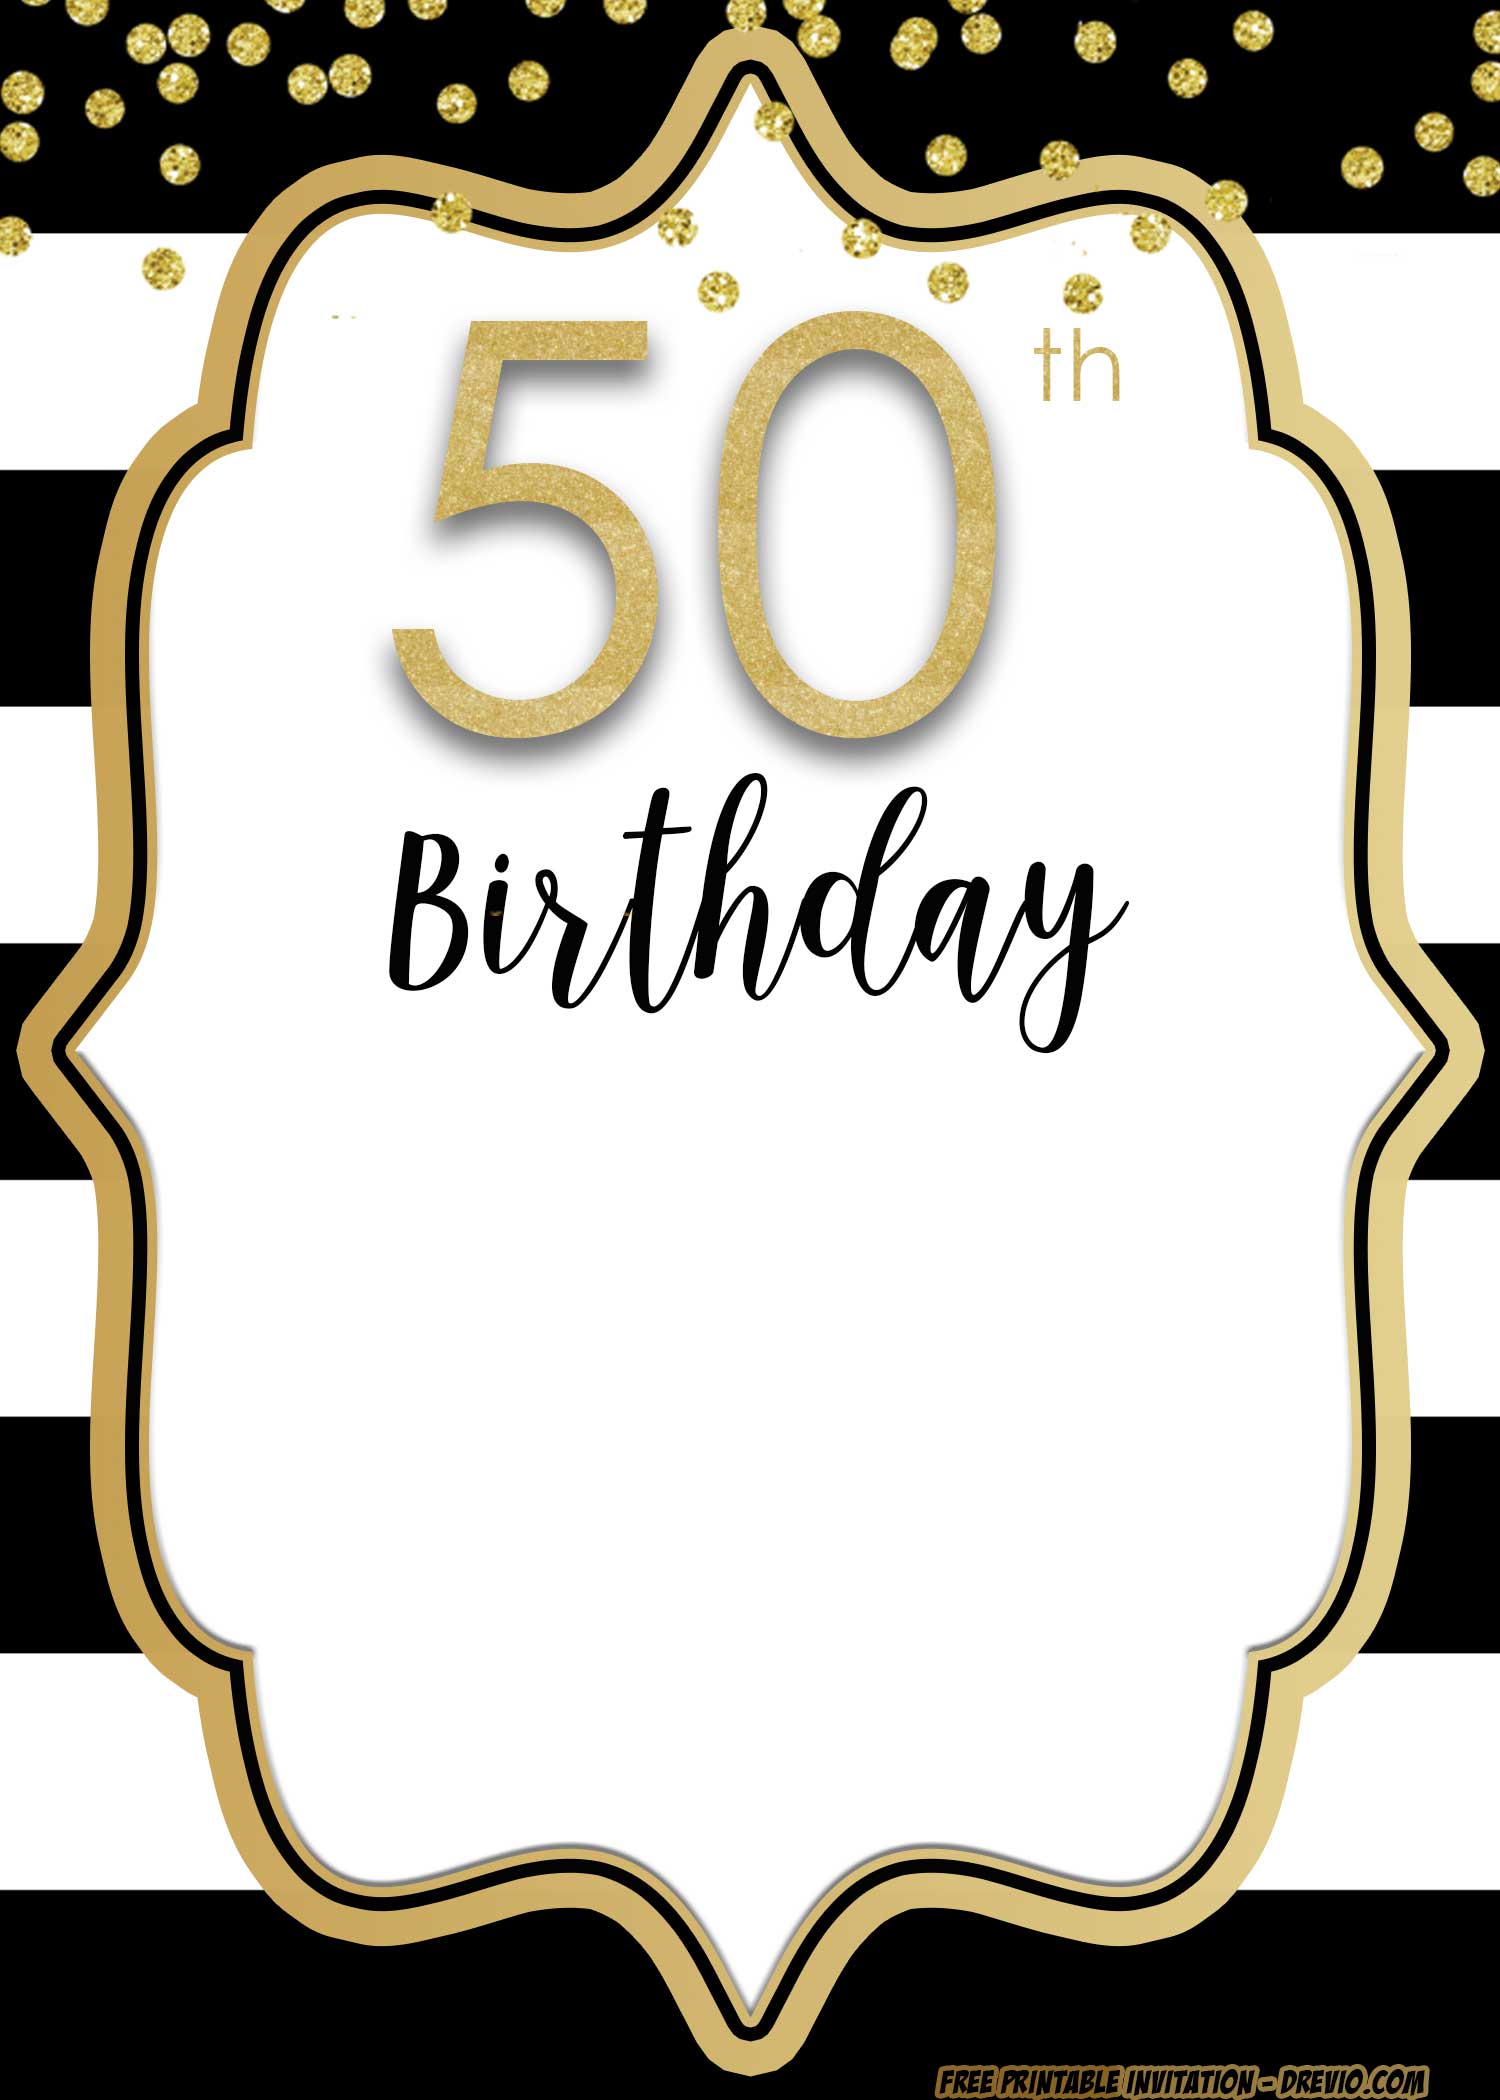 Birthday Invitations Template for 50th years old and up